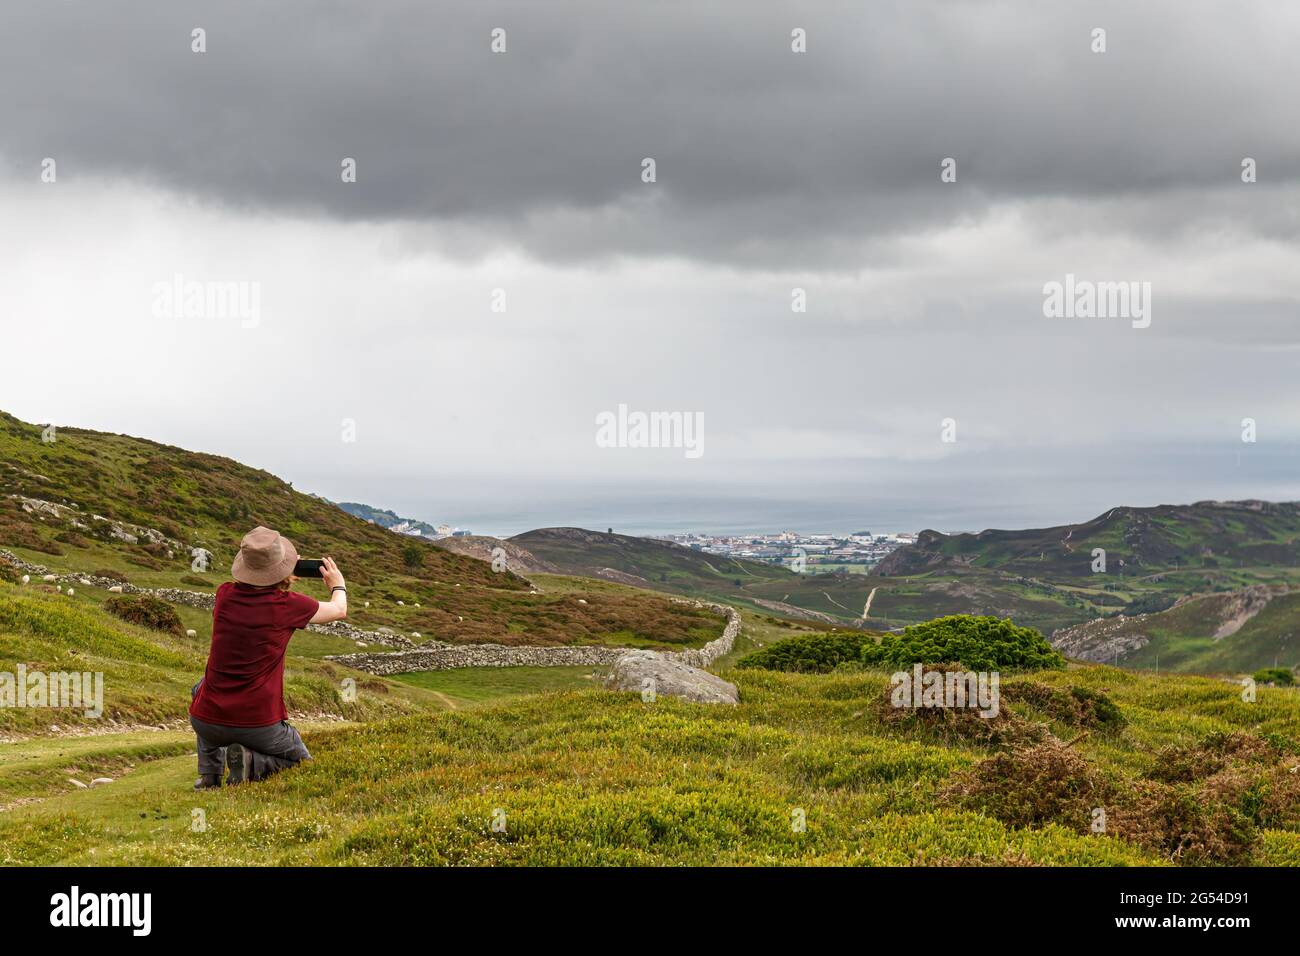 A single female walker taking photographs using a mobile phone on the scenery on the Wales Coastal Path at Penmaenmawr, Cony, Wales Stock Photo